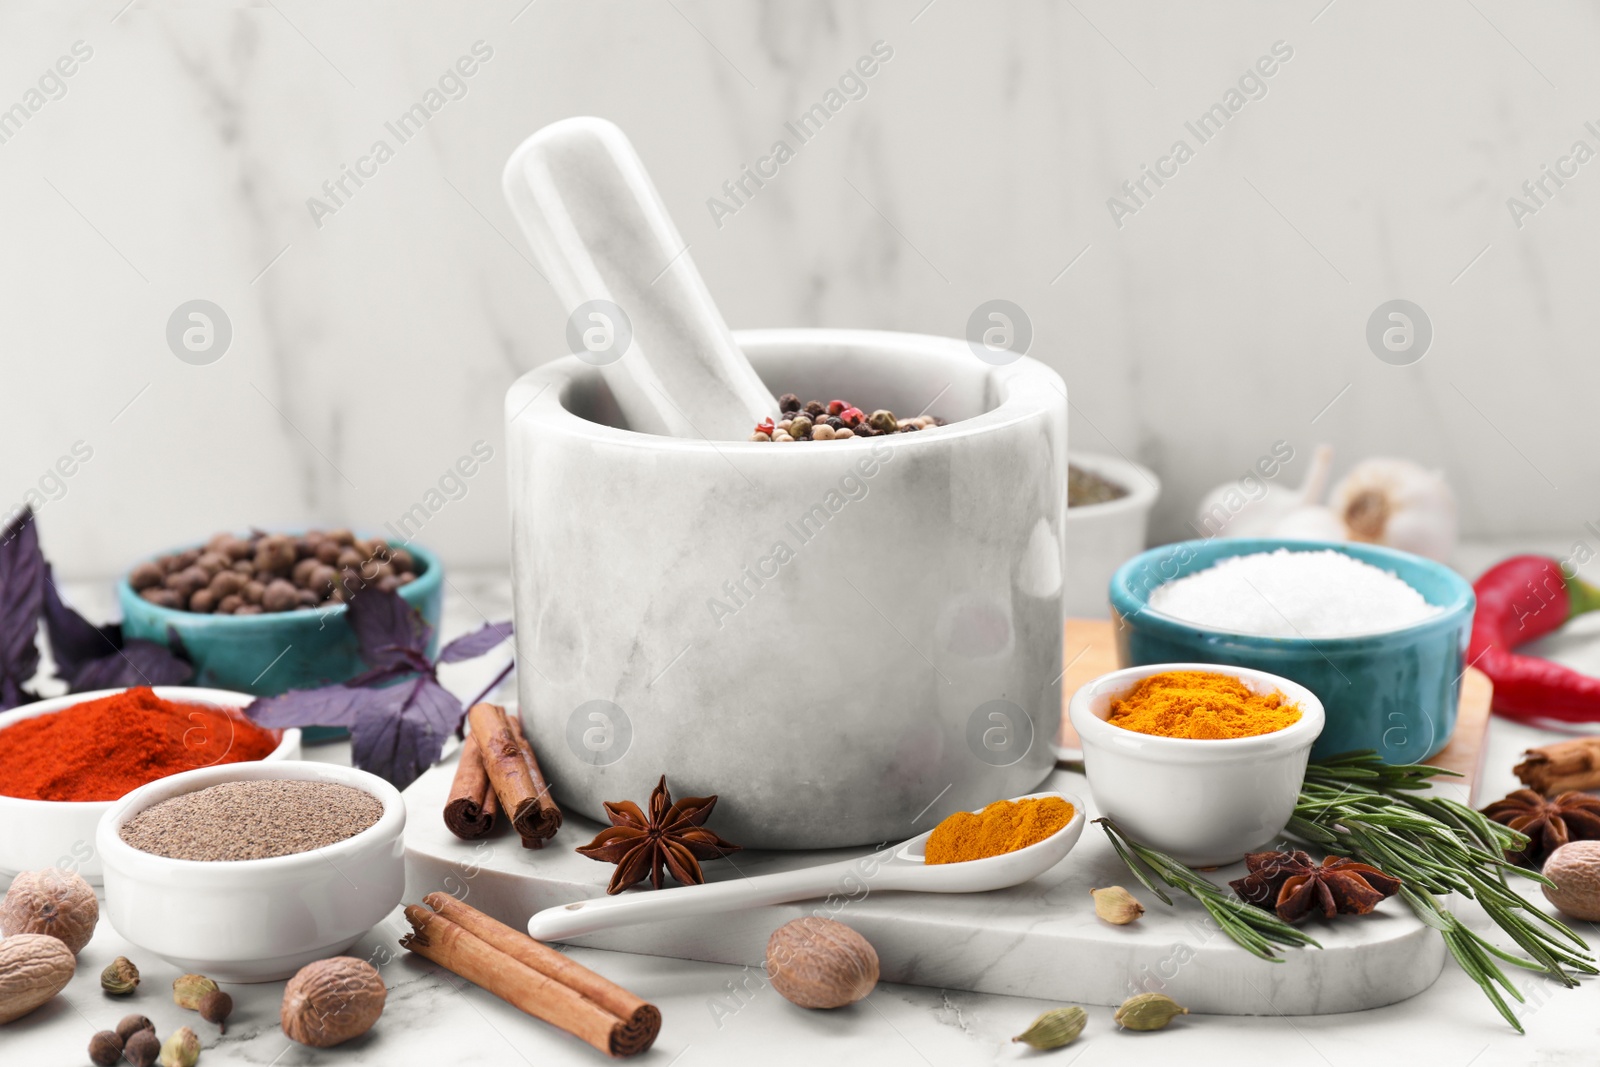 Photo of Mortar and different spices on white marble table